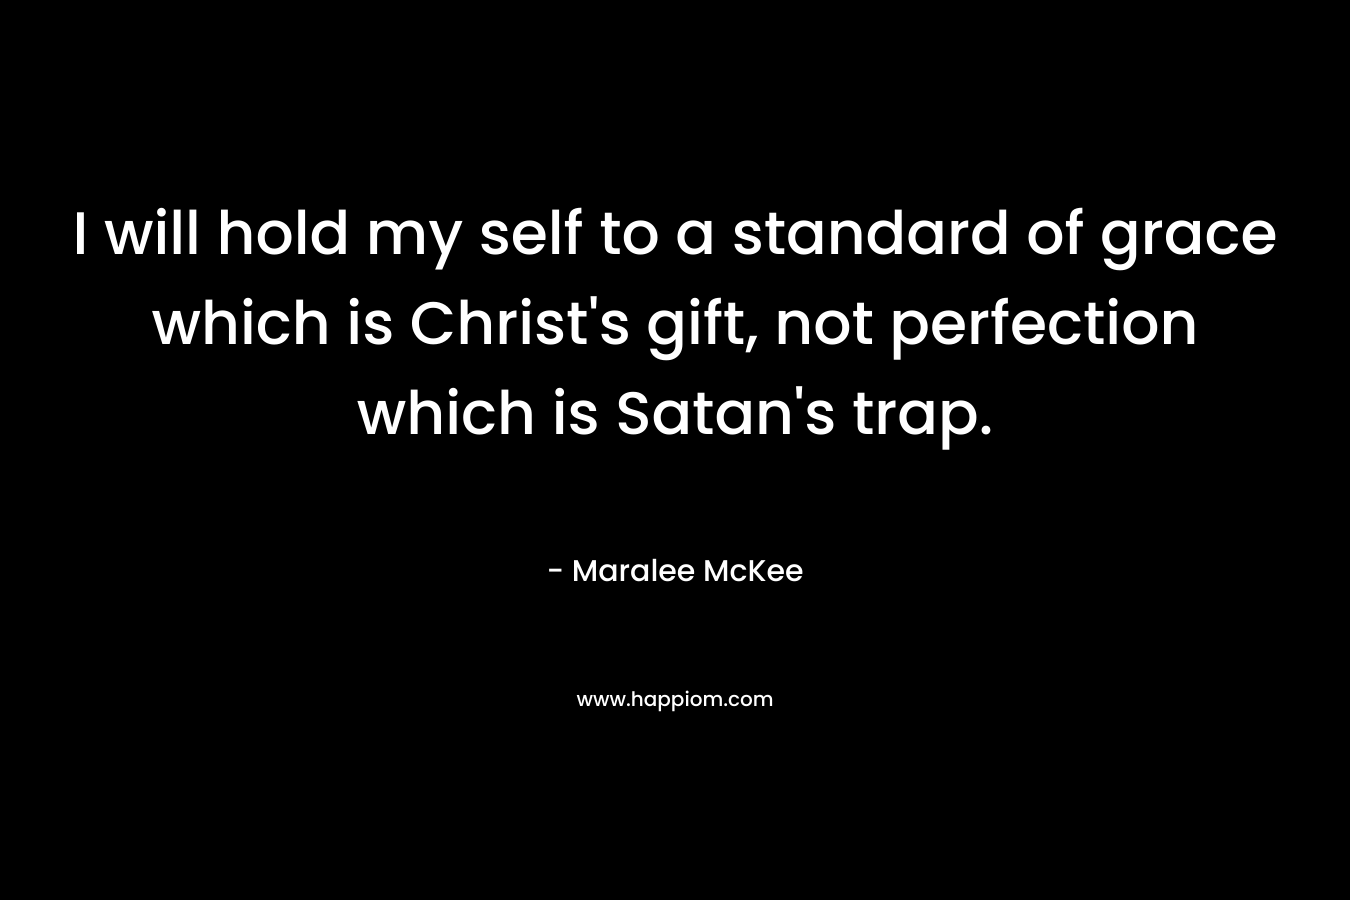 I will hold my self to a standard of grace which is Christ’s gift, not perfection which is Satan’s trap. – Maralee McKee